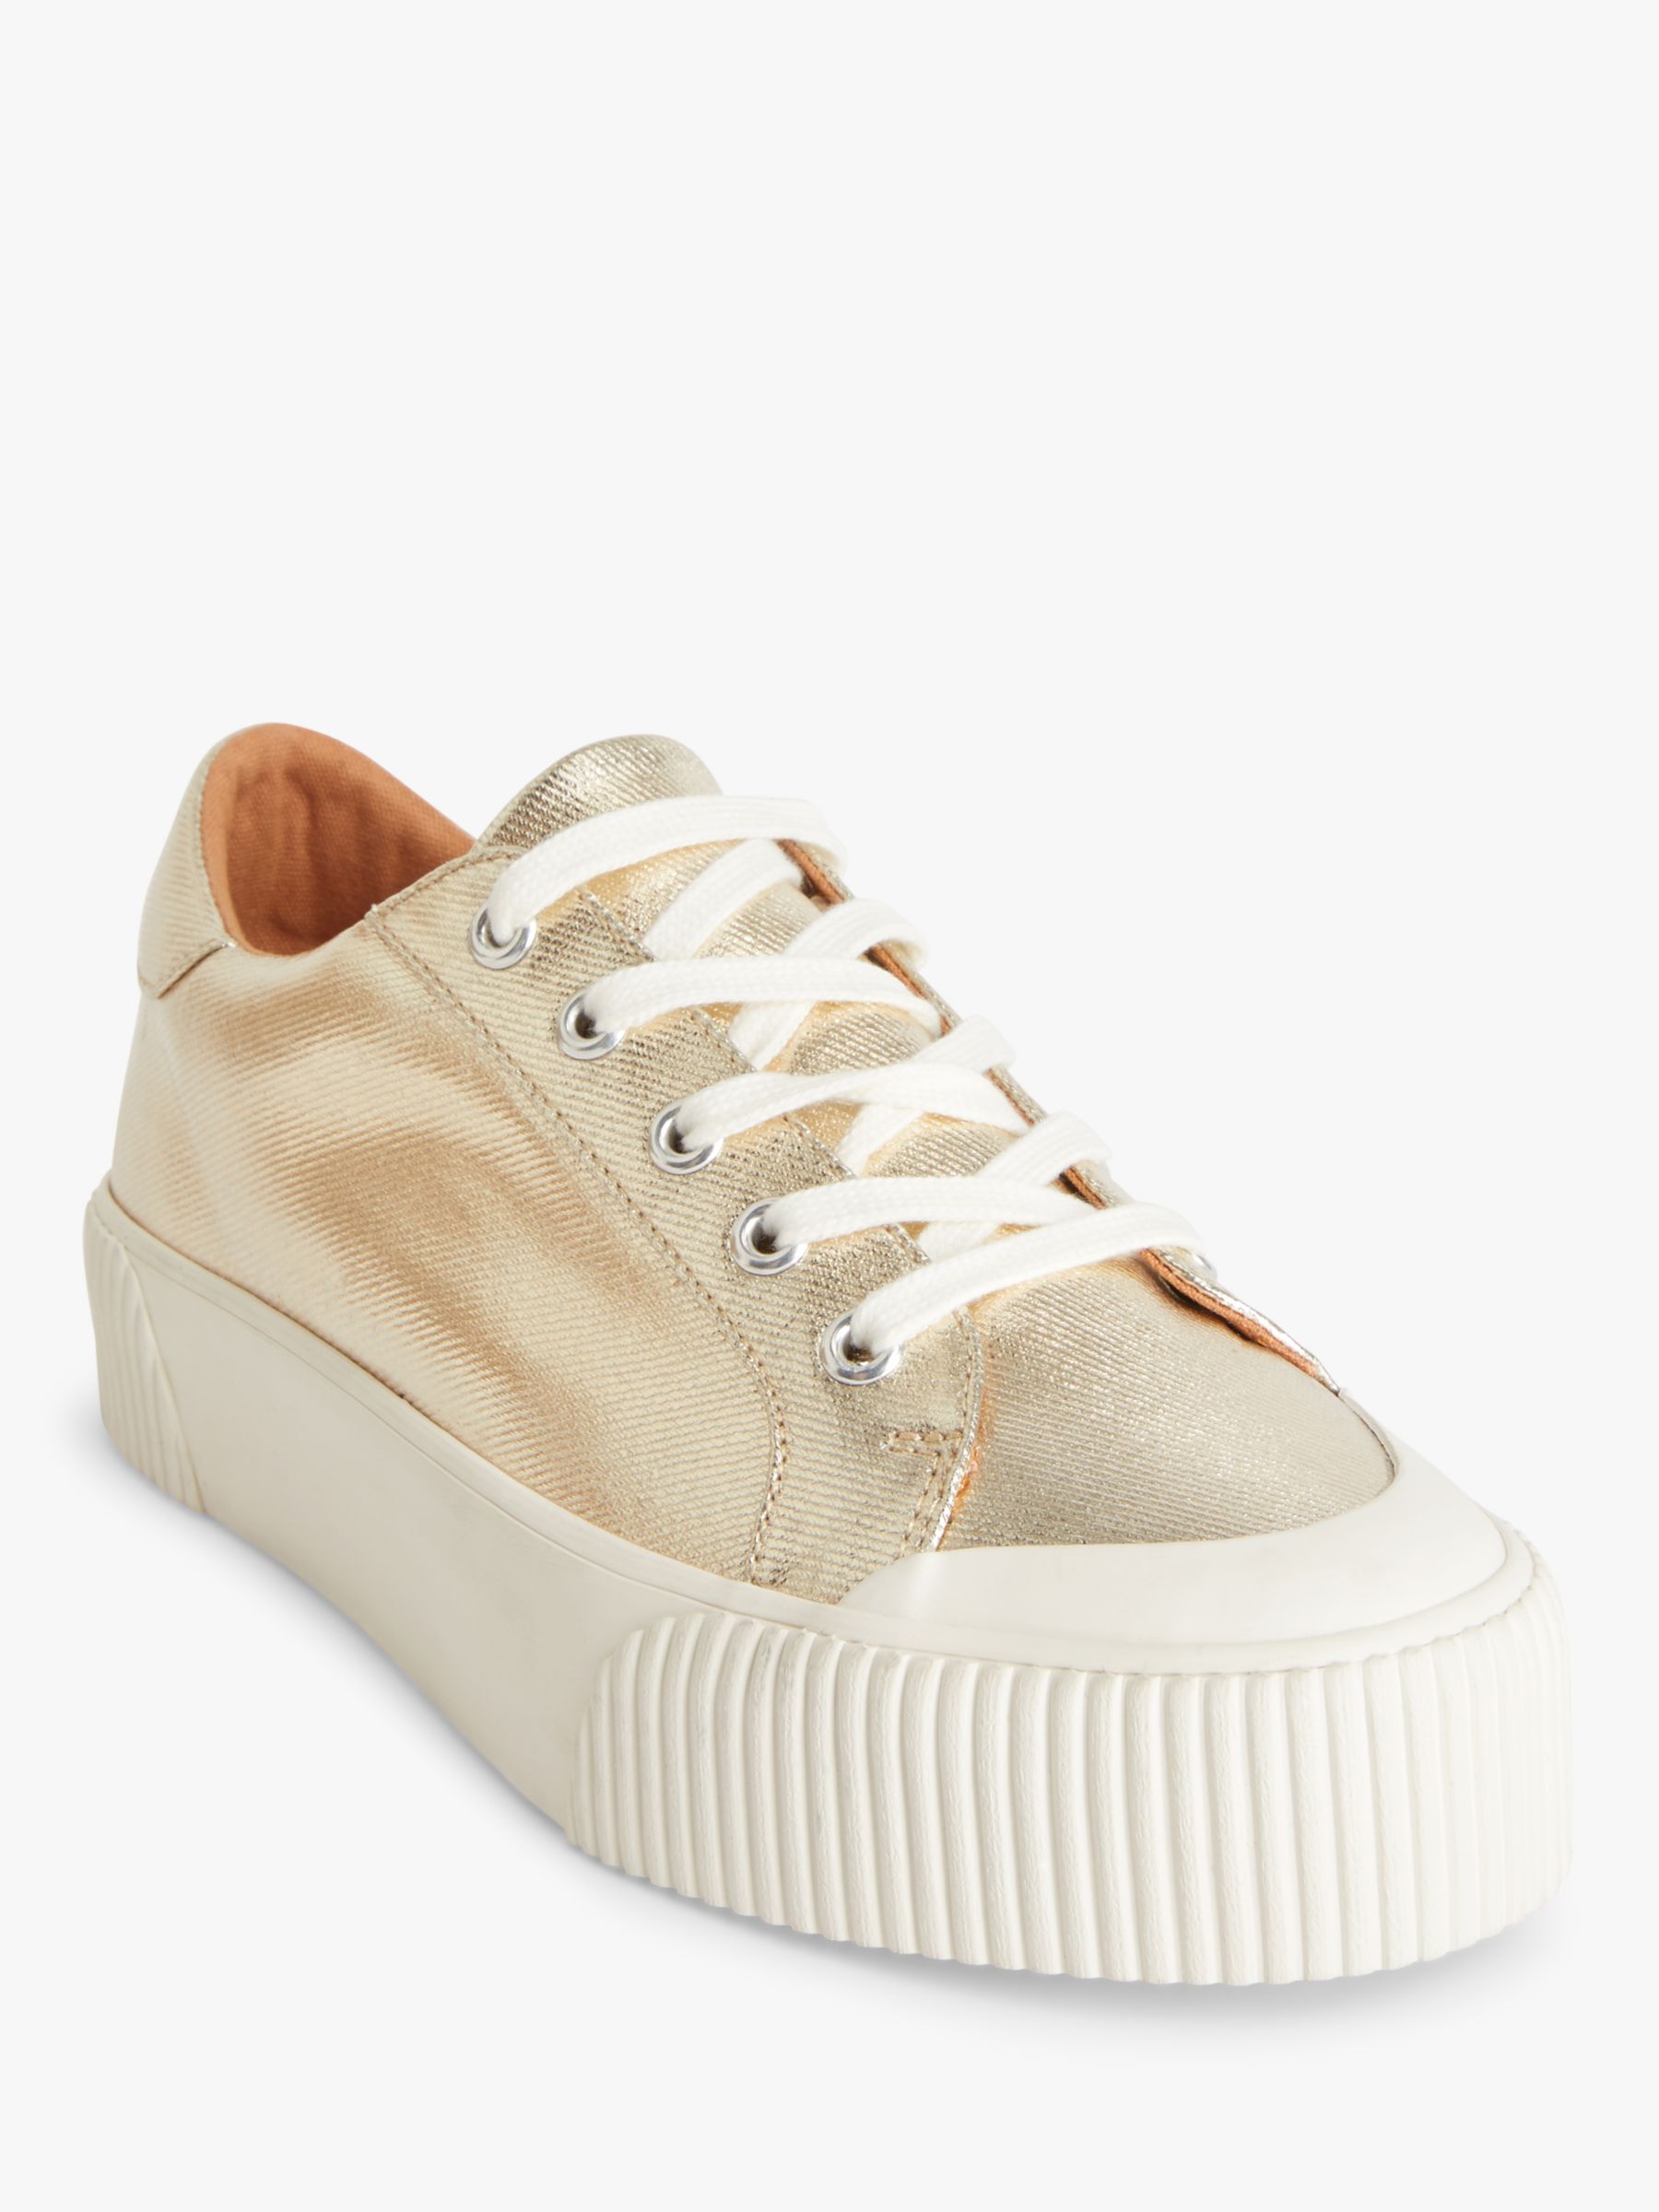 AND/OR Eloisa Flatform Metallic Lace Up Trainers, Gold, 3